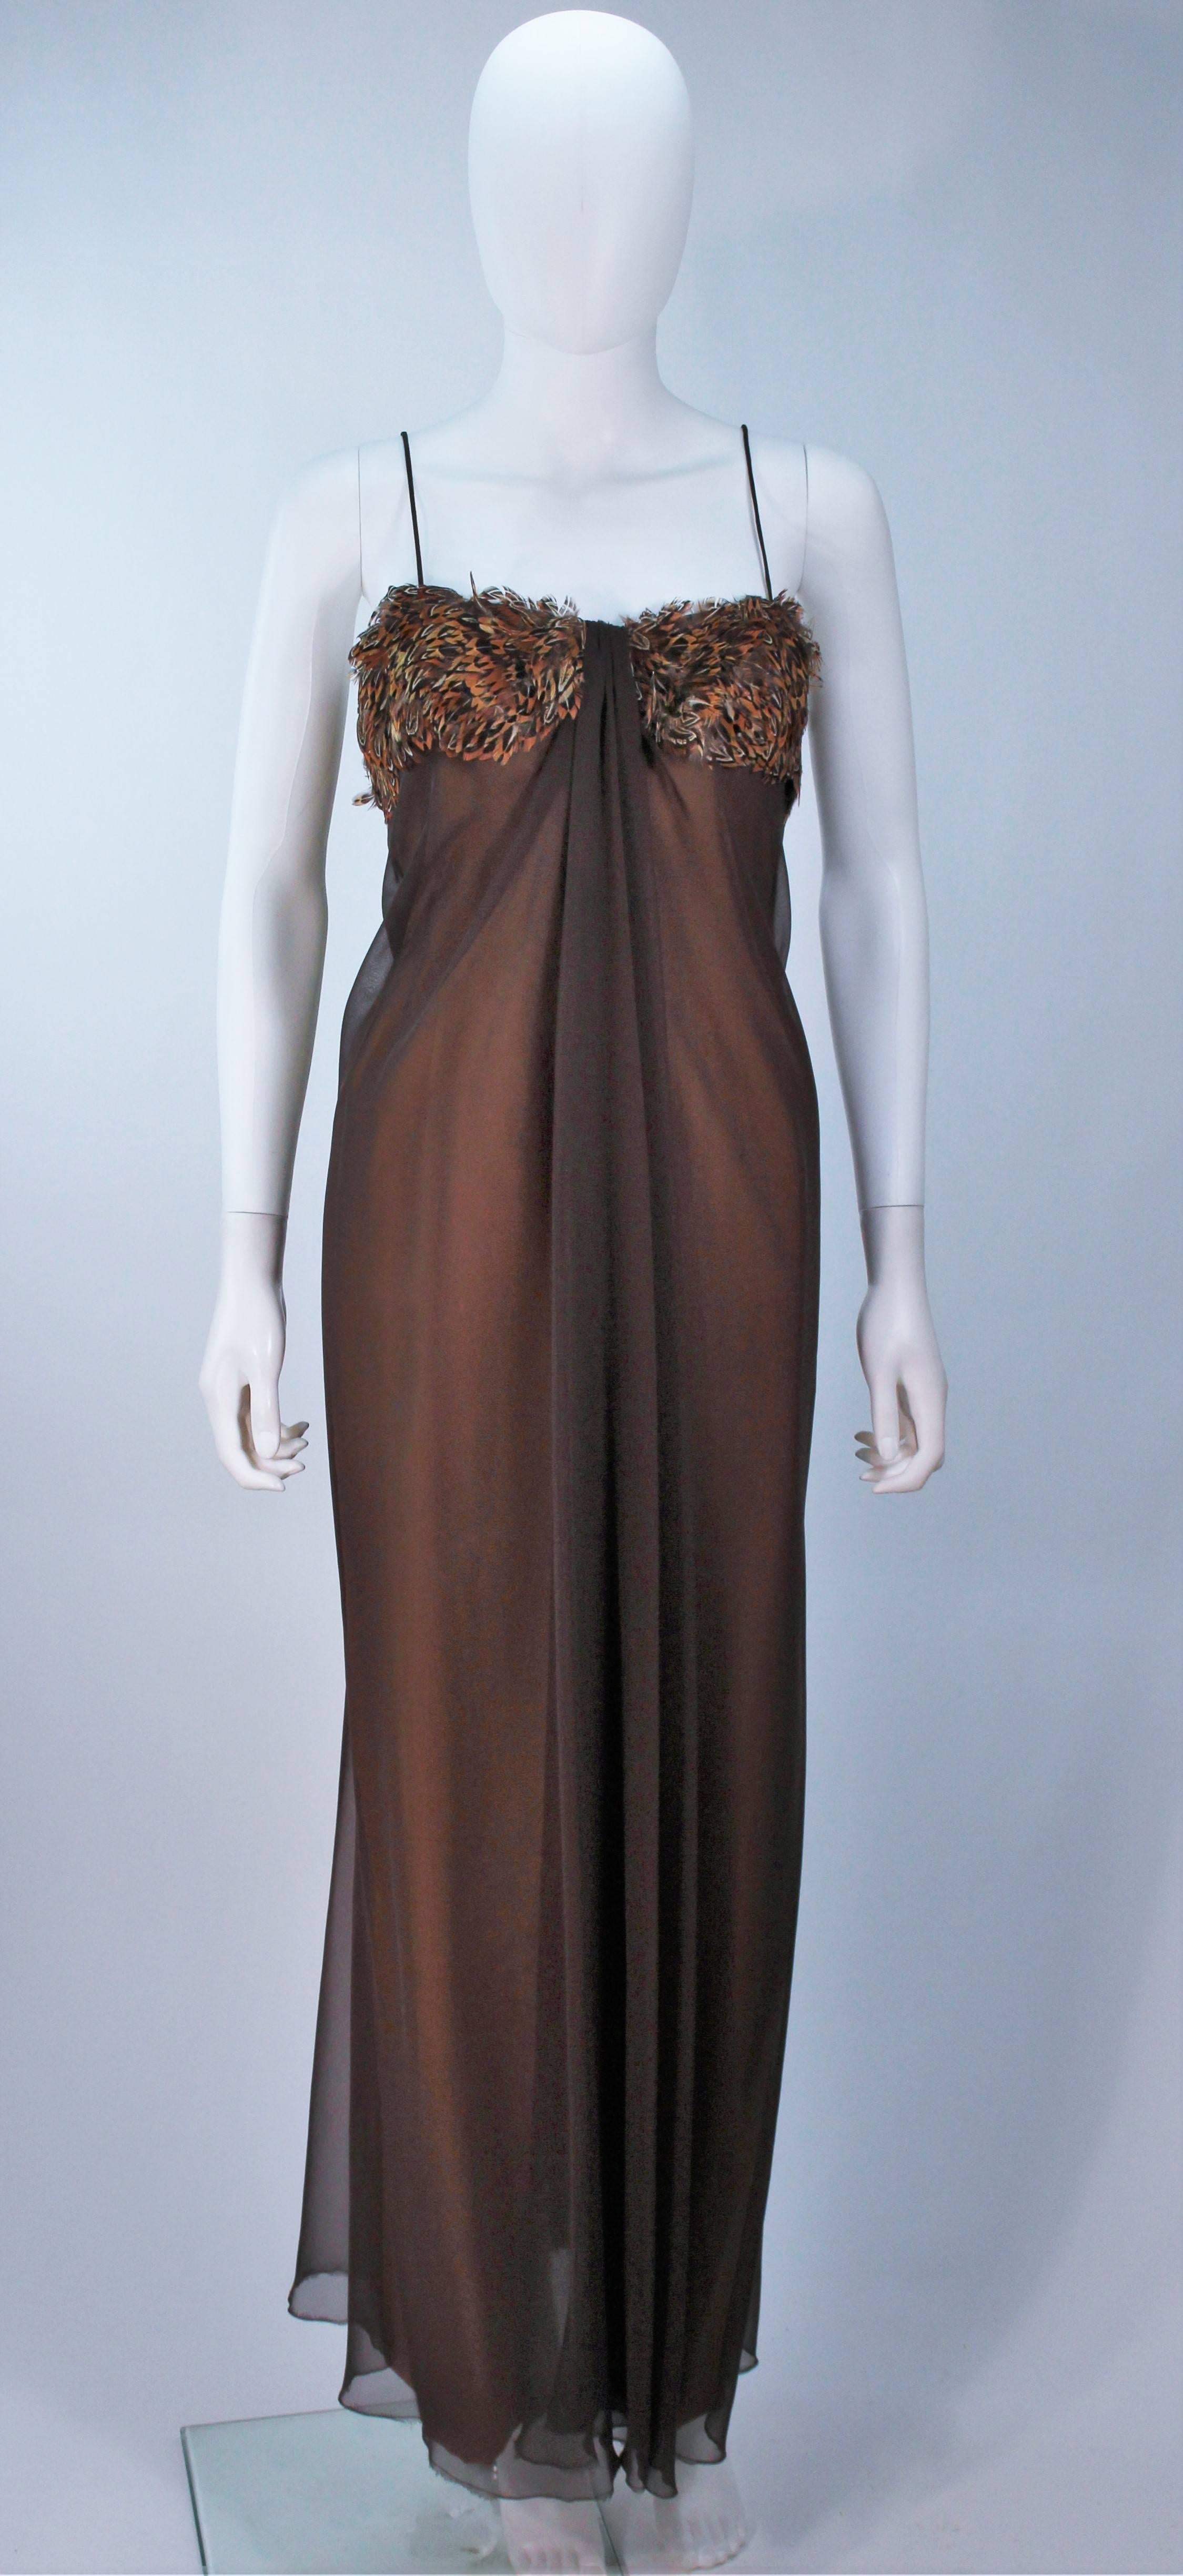  This Travilla gown is composed of a brown silk chiffon. Features a center front drape and peasant feather applique. There is a center back zipper closure. In excellent vintage condition.

  **Please cross-reference measurements for personal